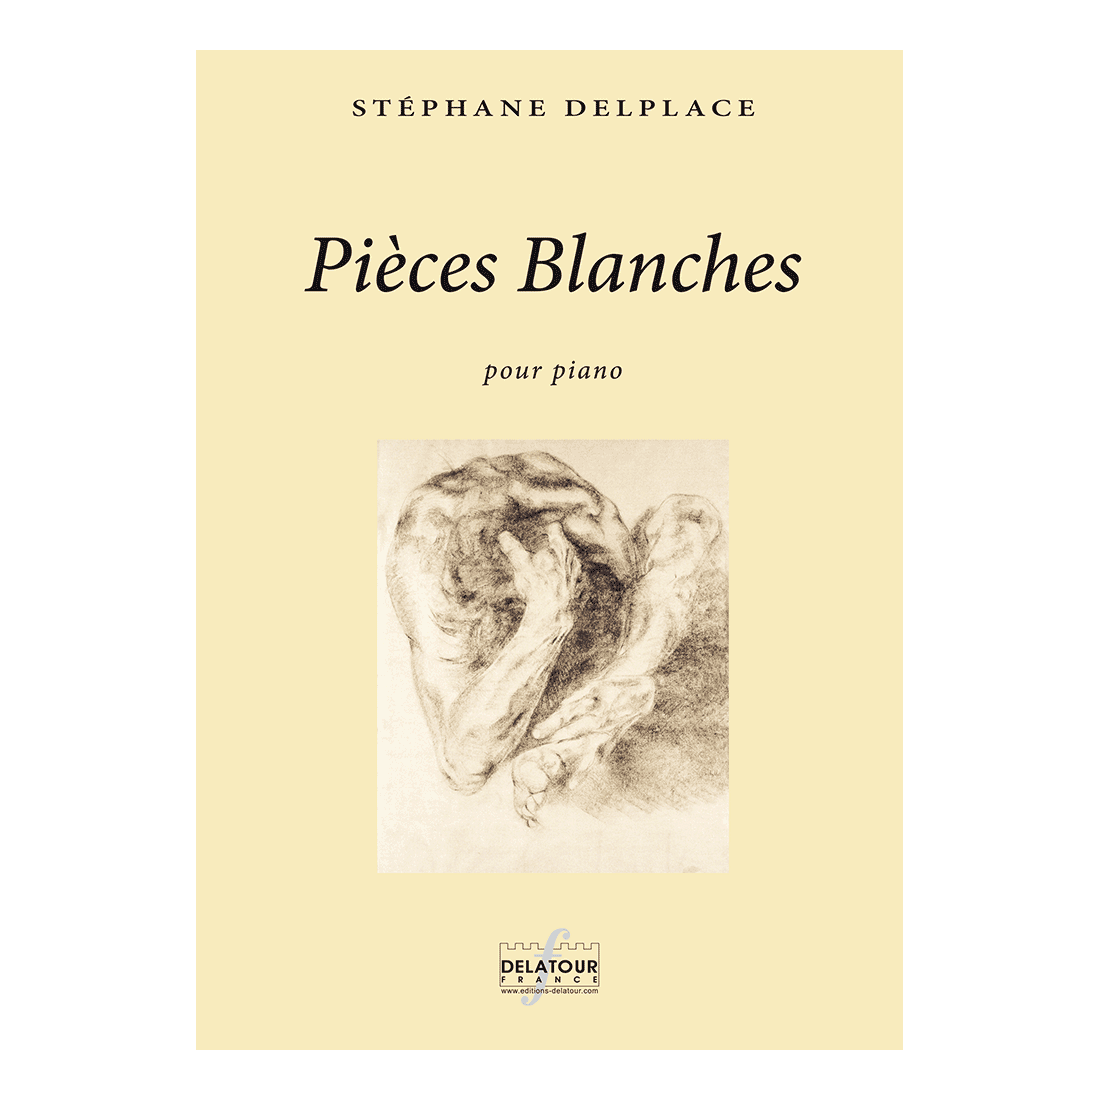 Pièces blanches for piano